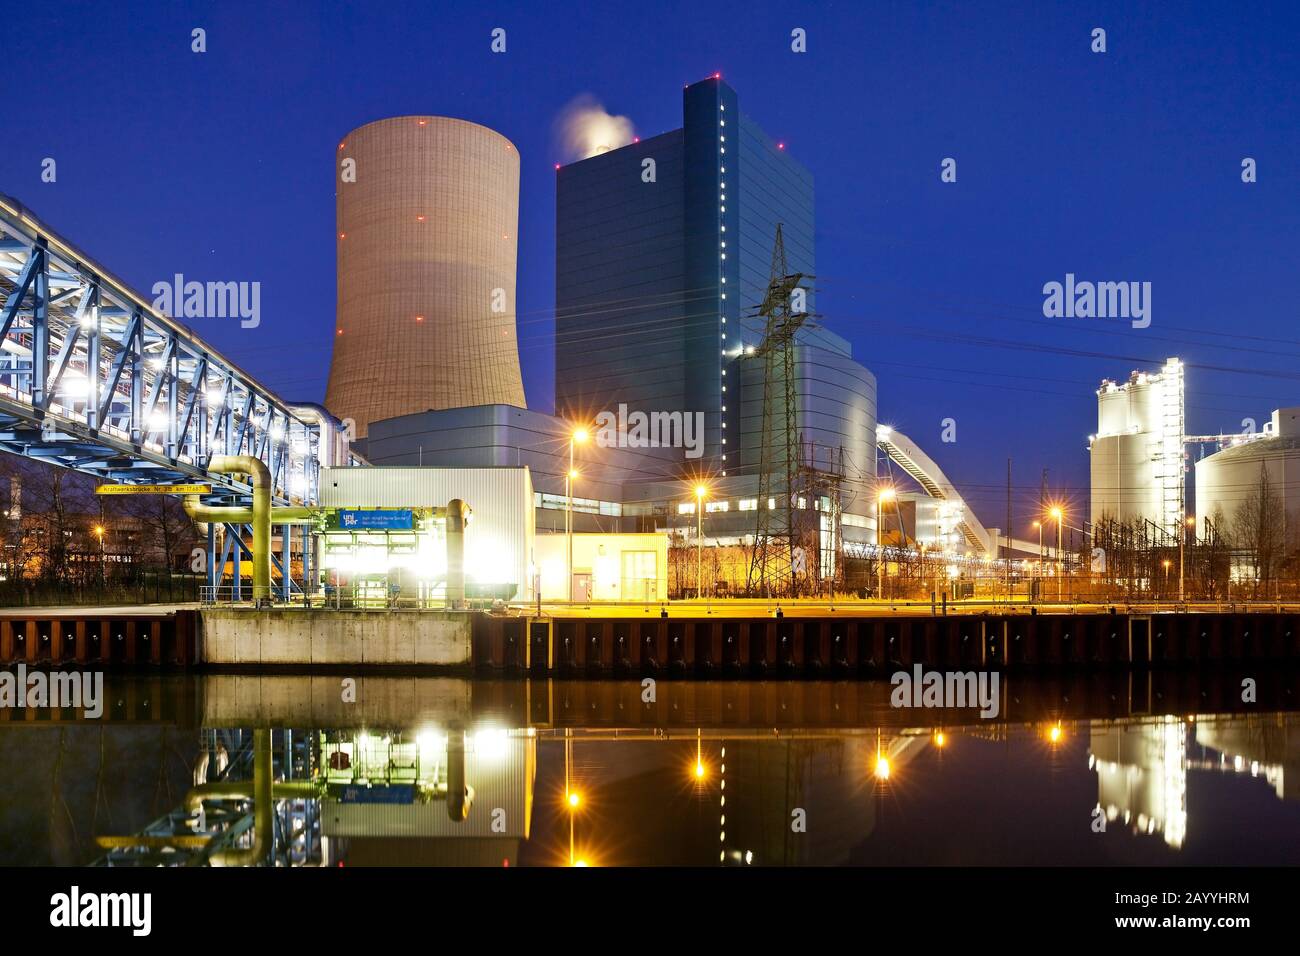 coal-fired power stations Datteln 4 at Datteln-Hamm-Chanel at blue our, Germany, North Rhine-Westphalia, Ruhr Area, Datteln Stock Photo